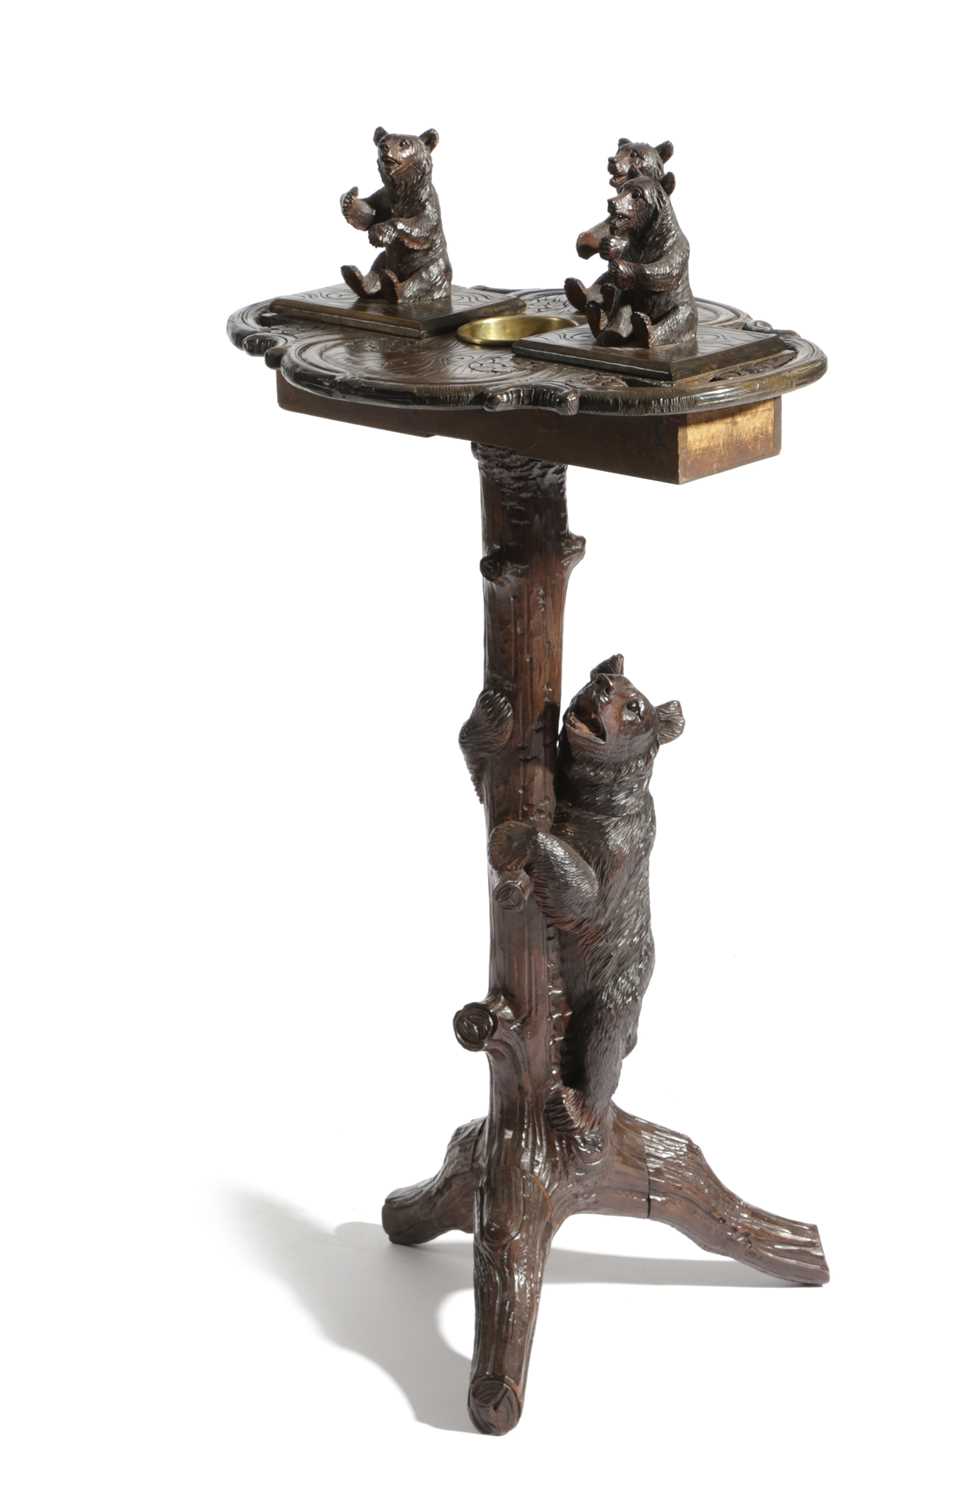 A BLACK FOREST LINDEN WOOD SMOKER'S COMPANION TABLE LATE 19TH CENTURY carved with a standing bear